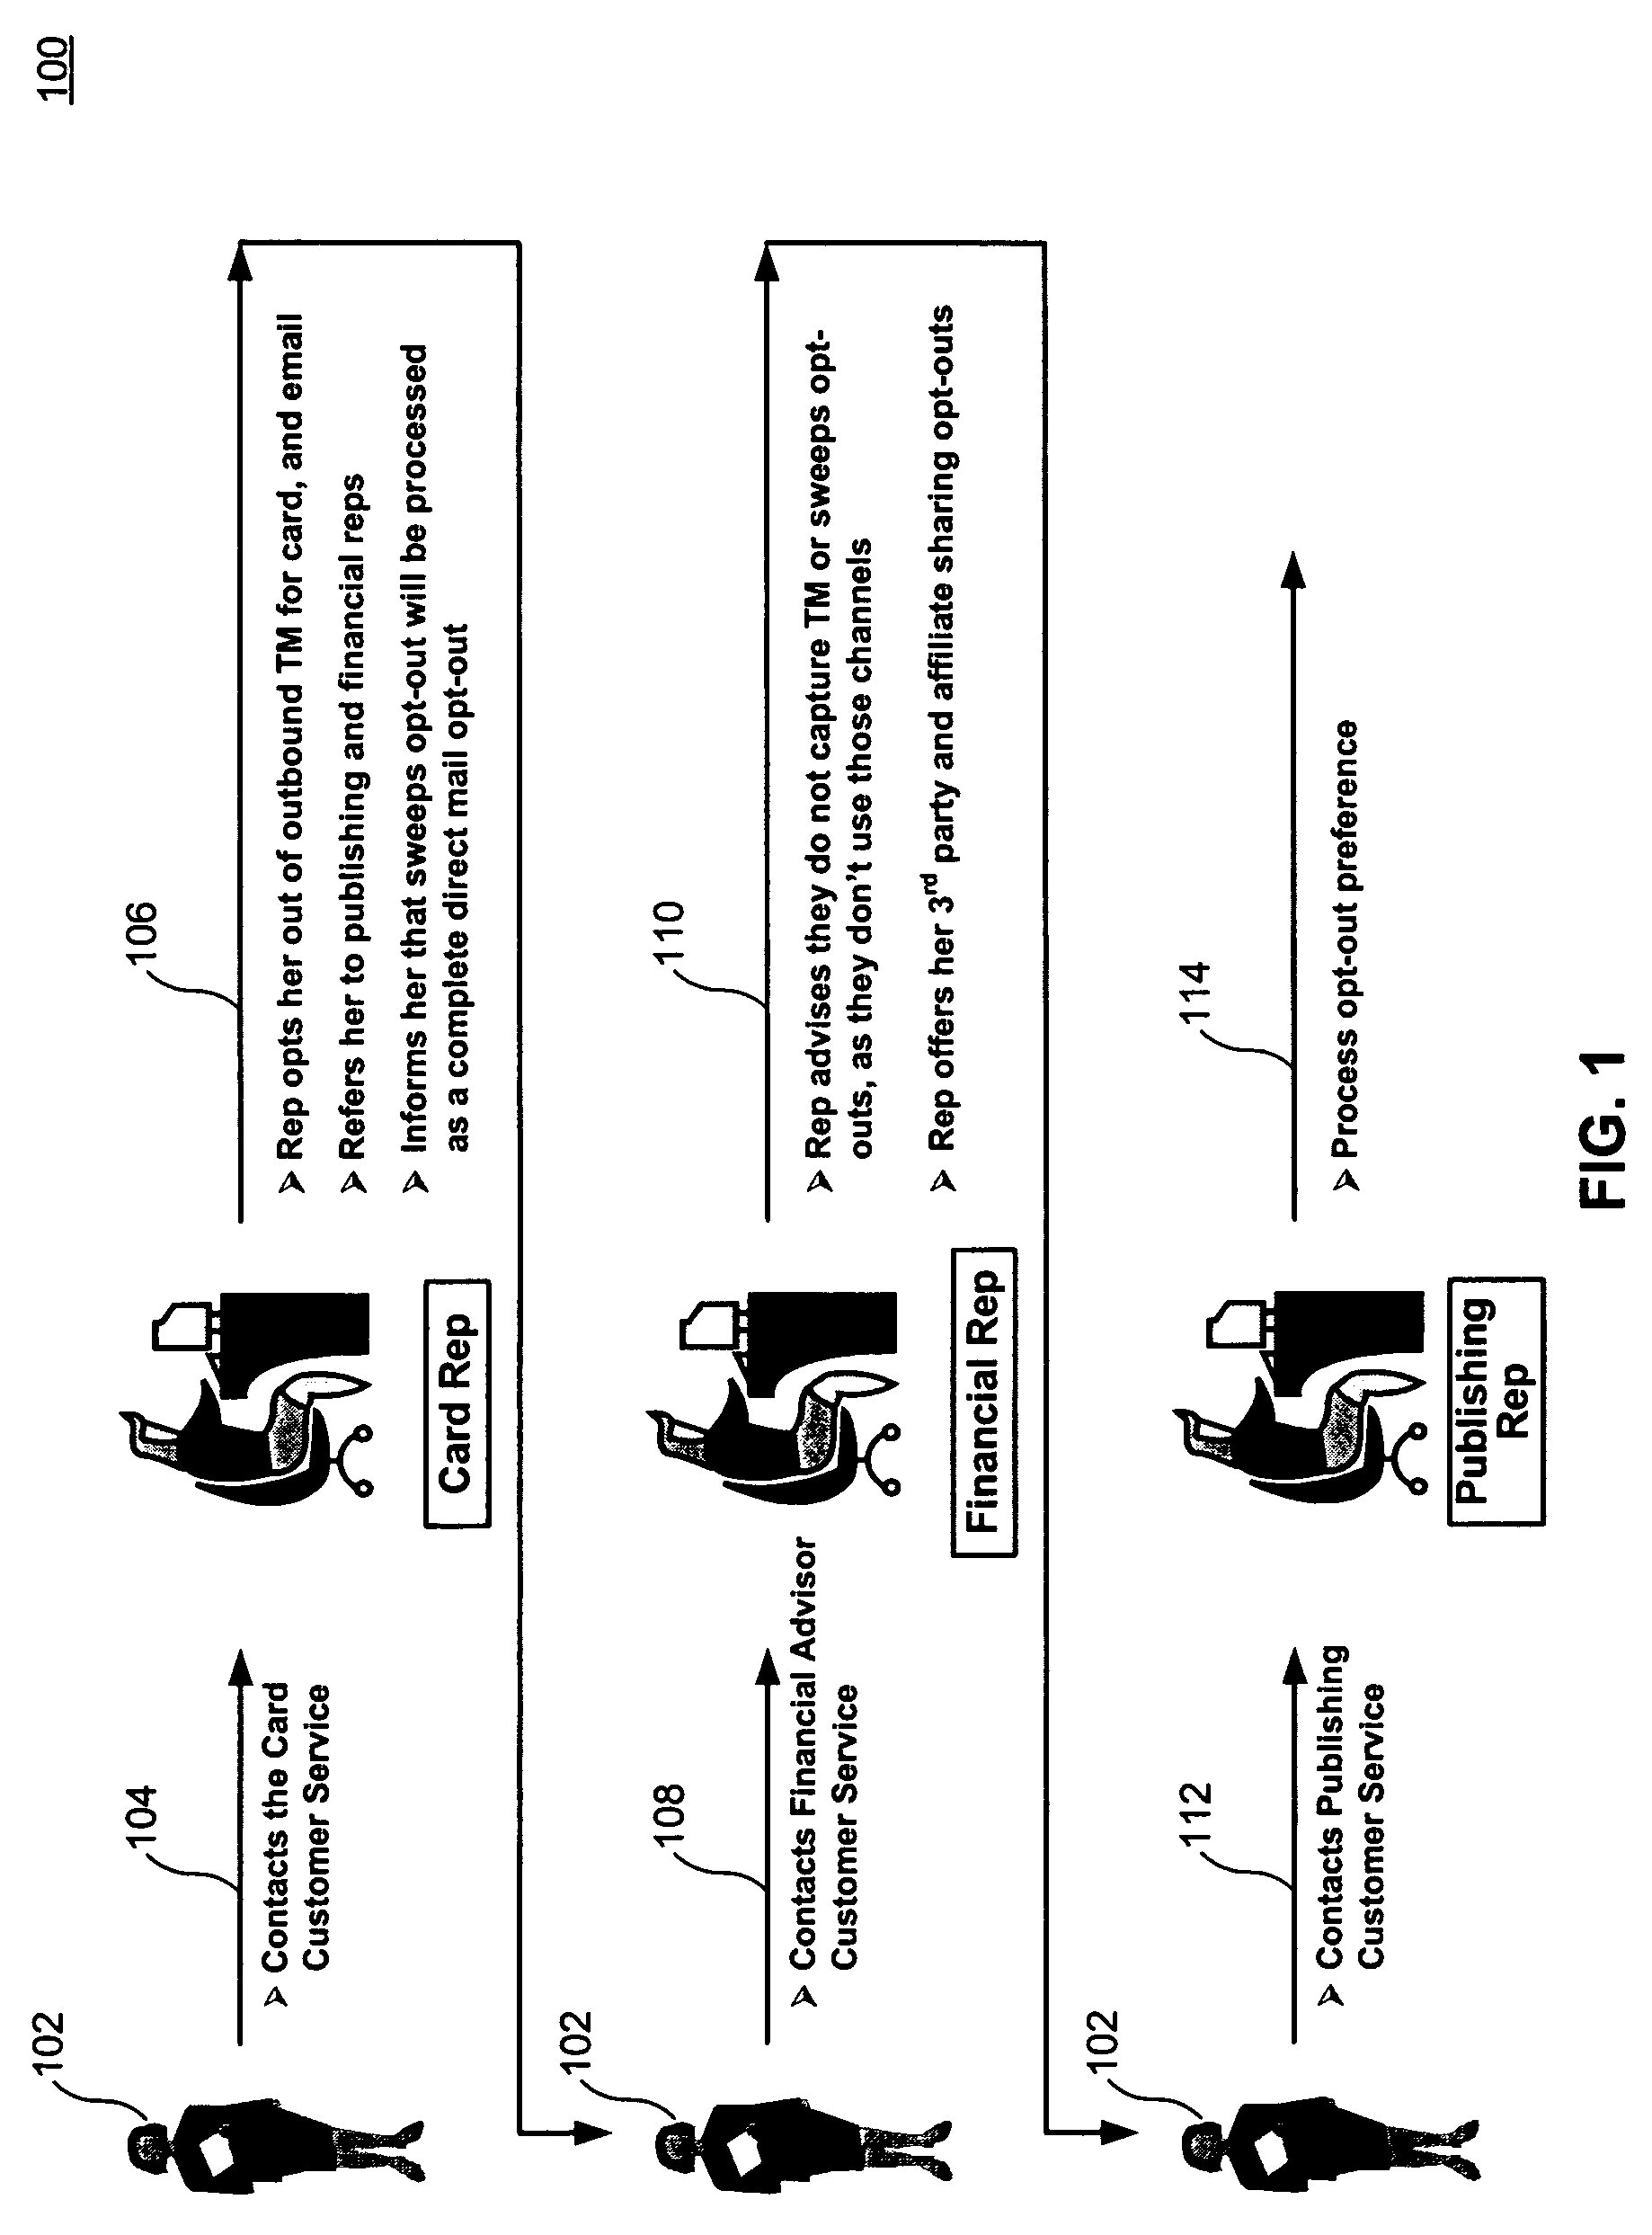 Method, system, and computer program product for honoring customer privacy and preferences